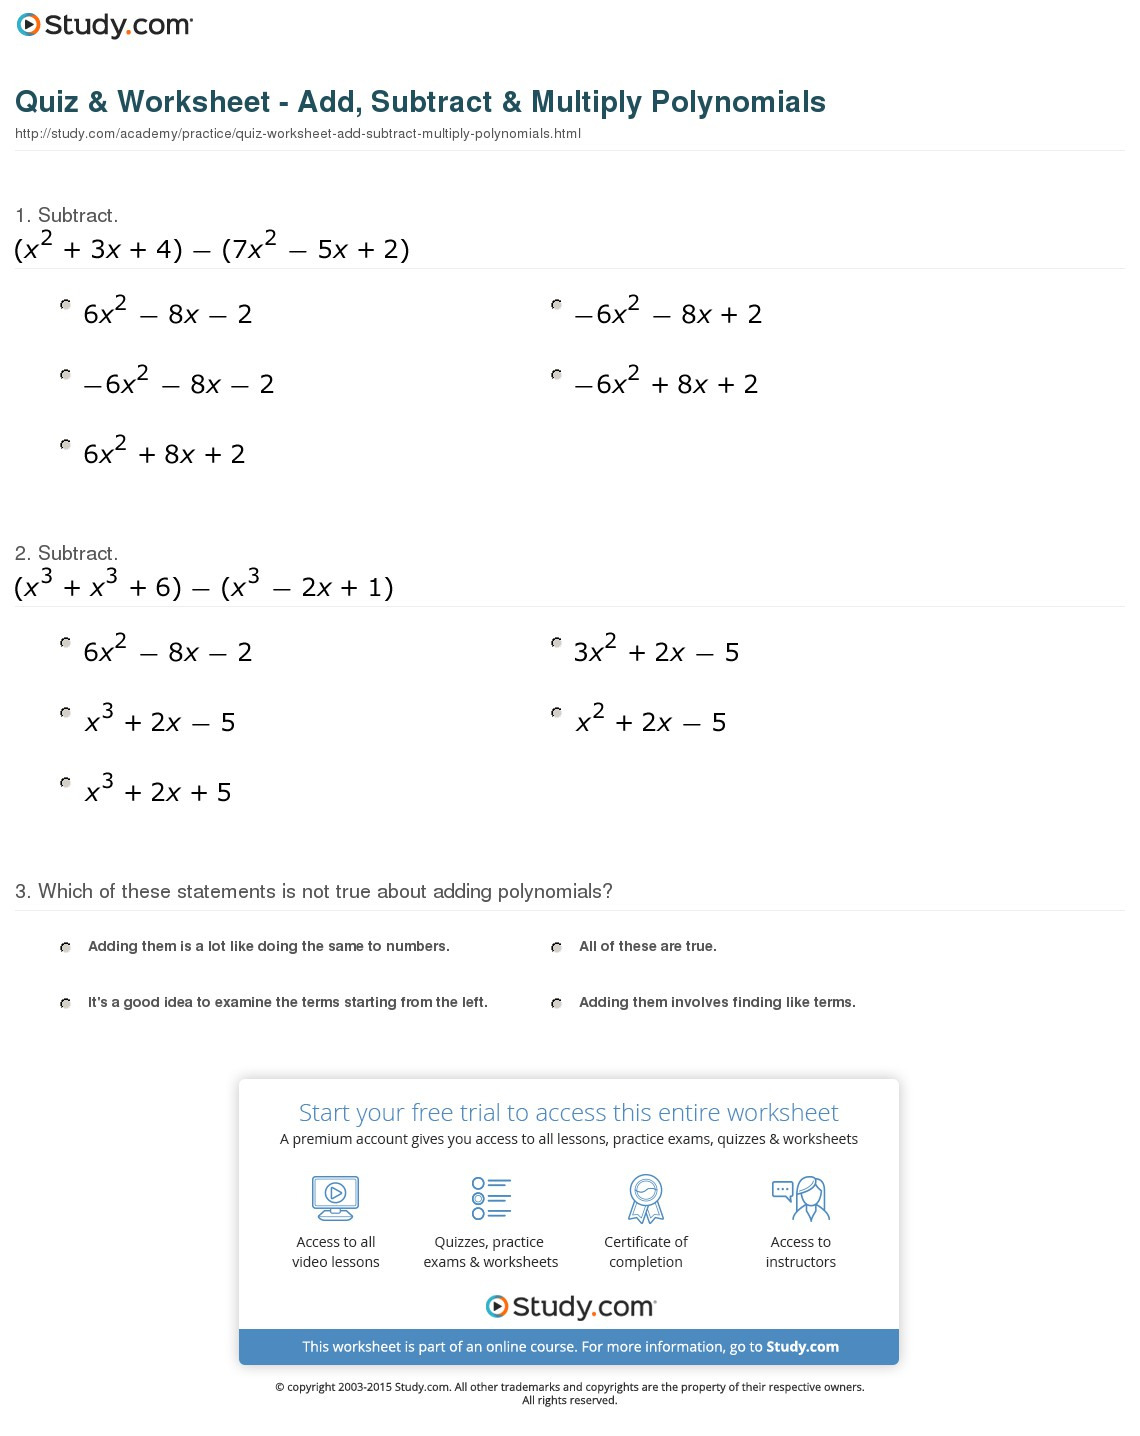 quiz-worksheet-add-subtract-multiply-polynomials-db-excel